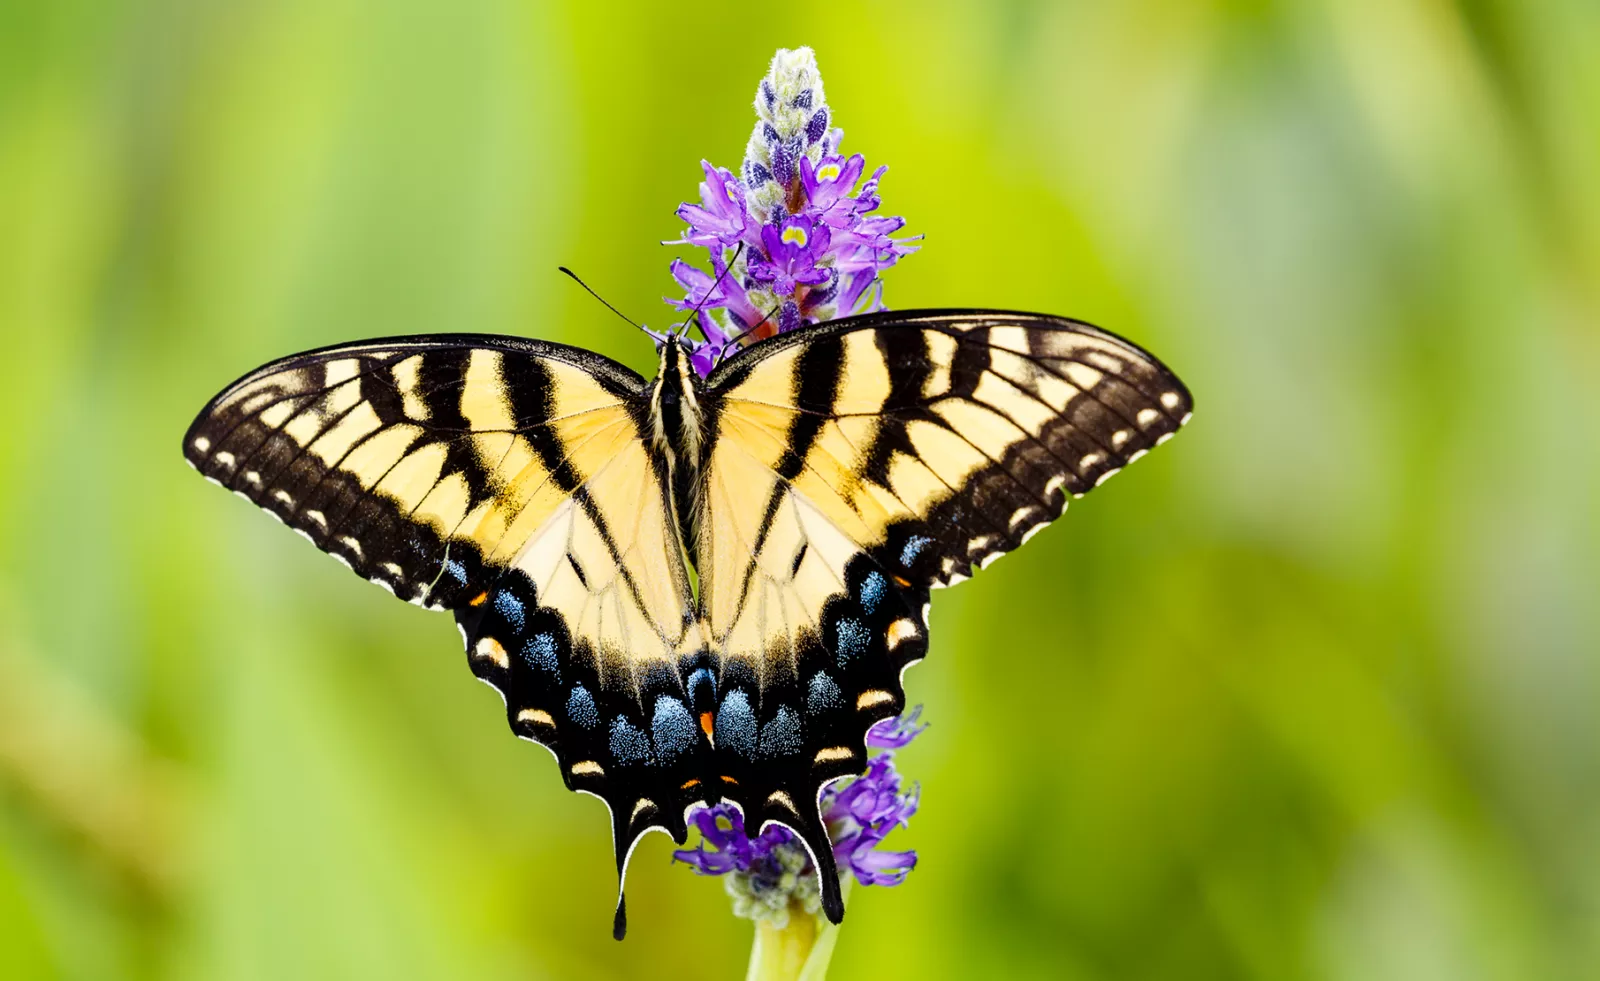  Picture of a butterfly on a flower pollinating.
